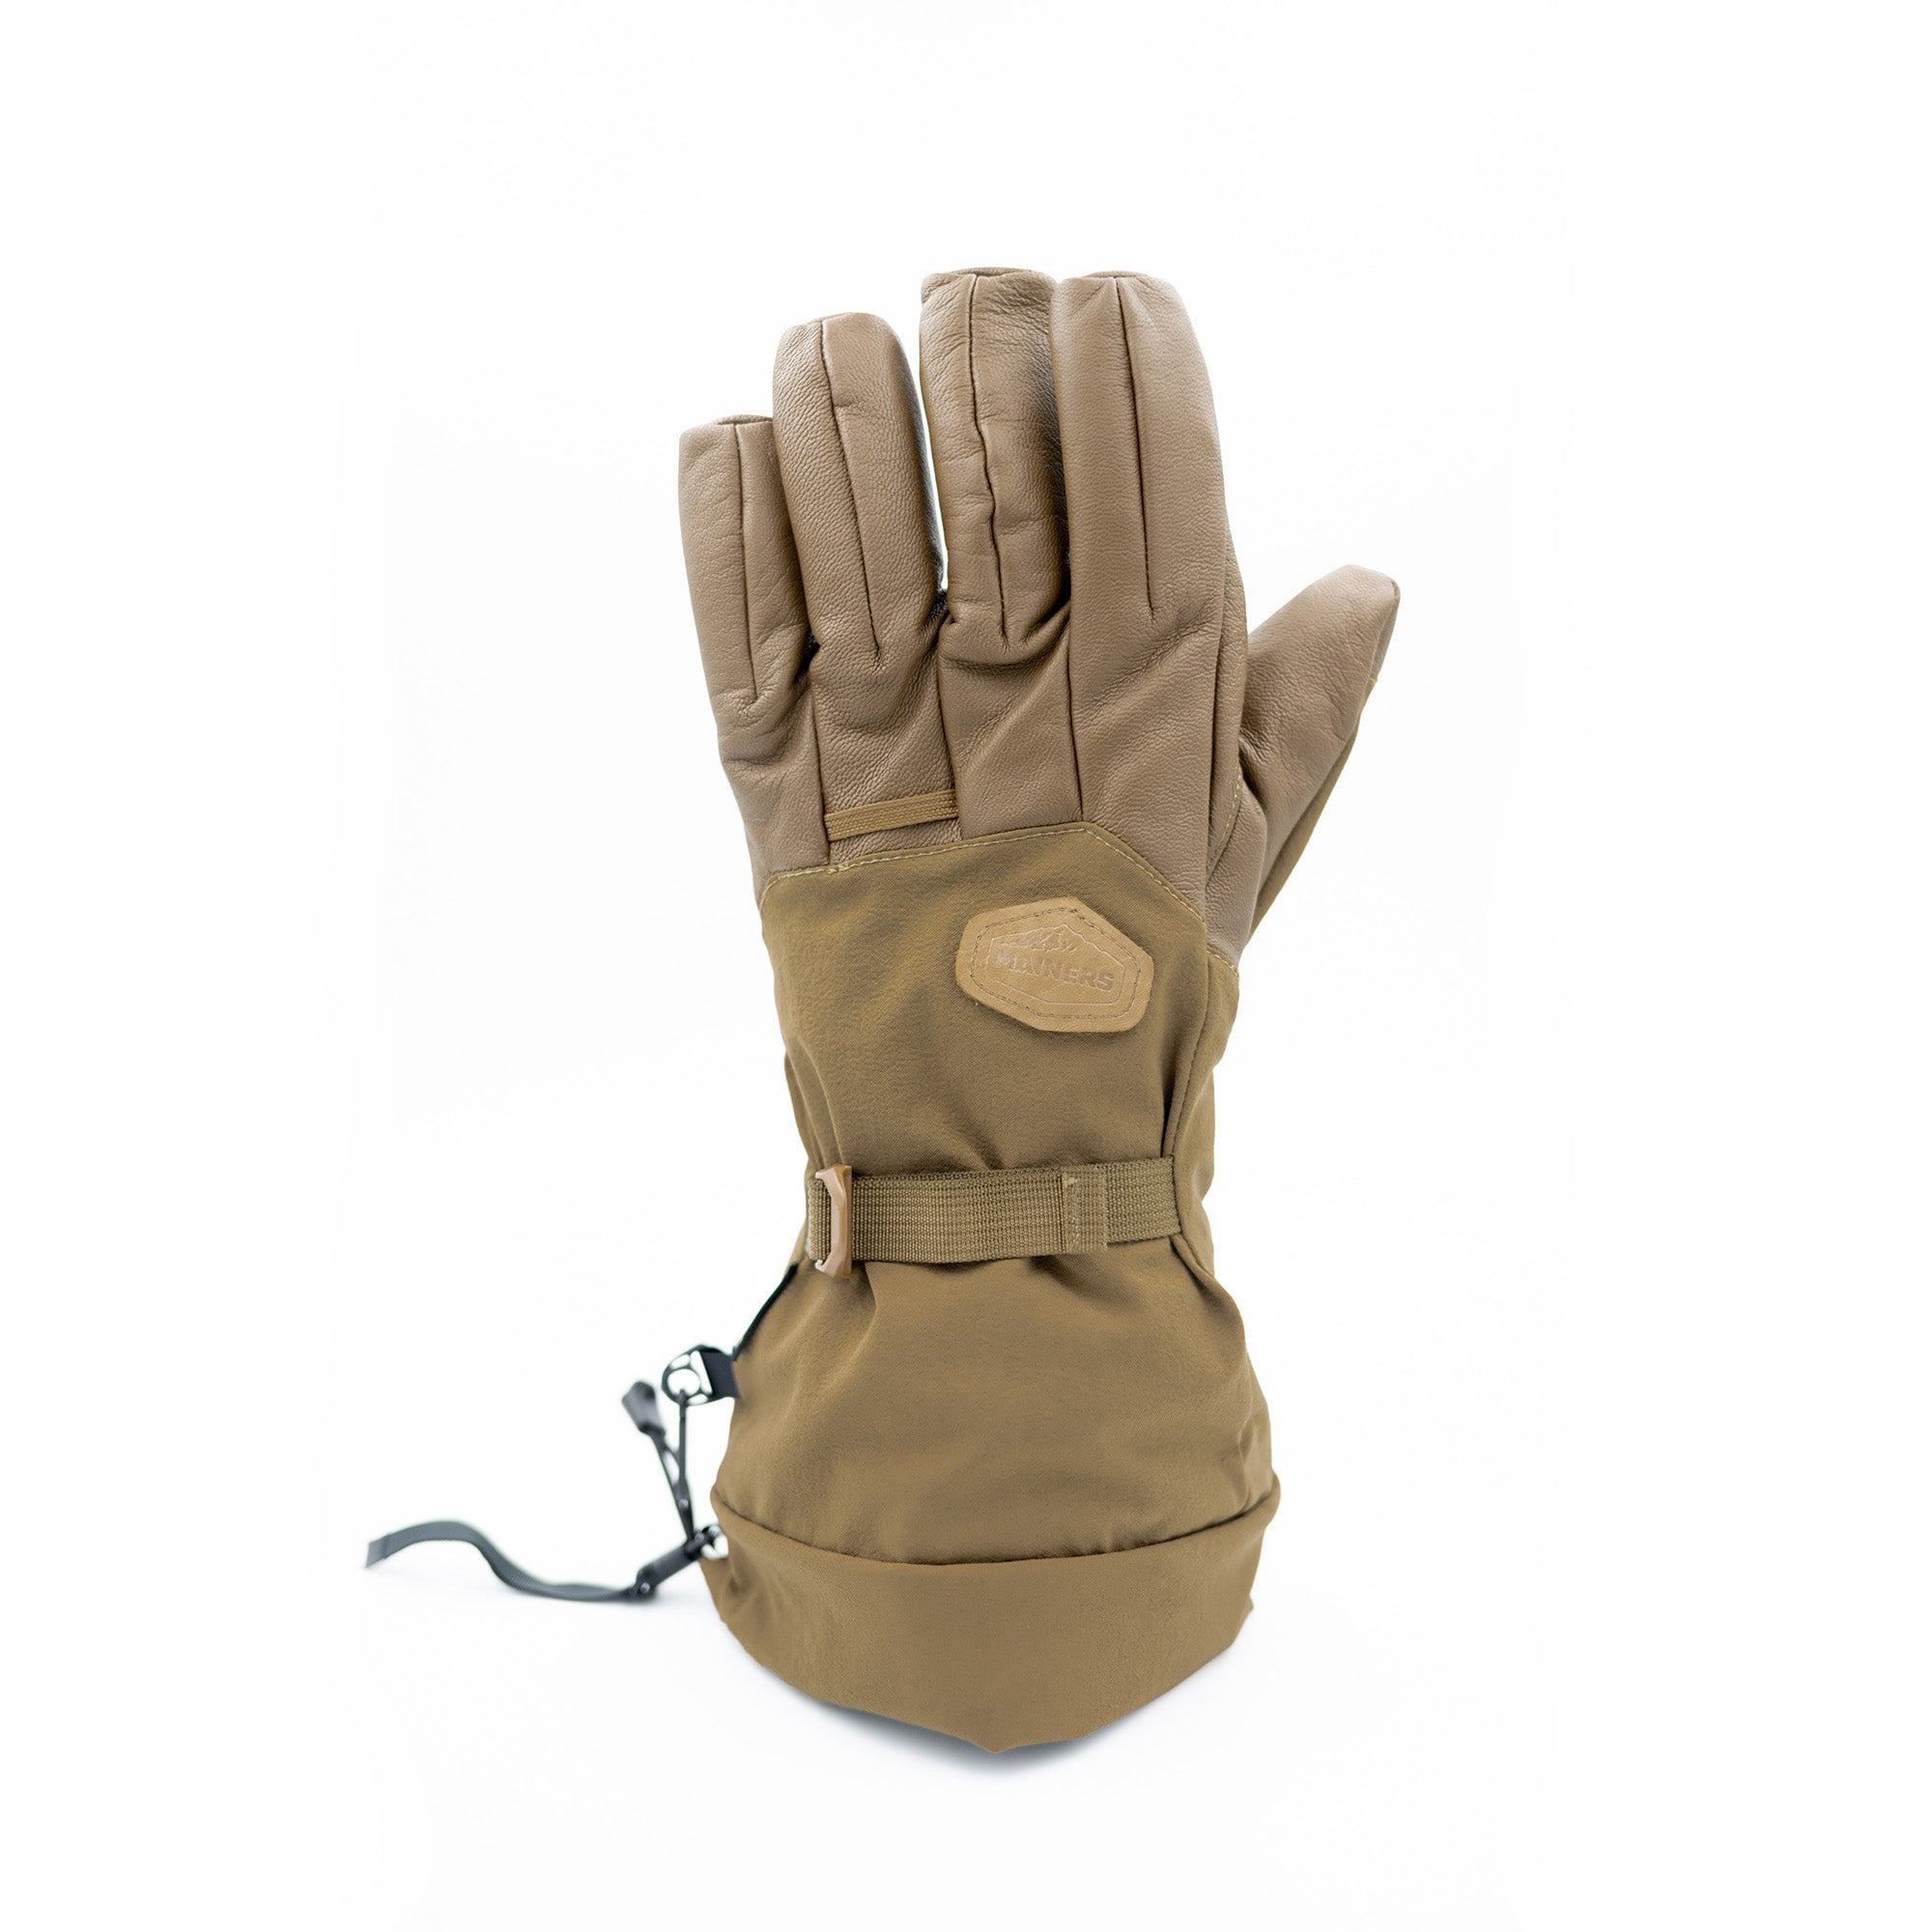 A pair of Mainers Rangeley Gloves on a white background.